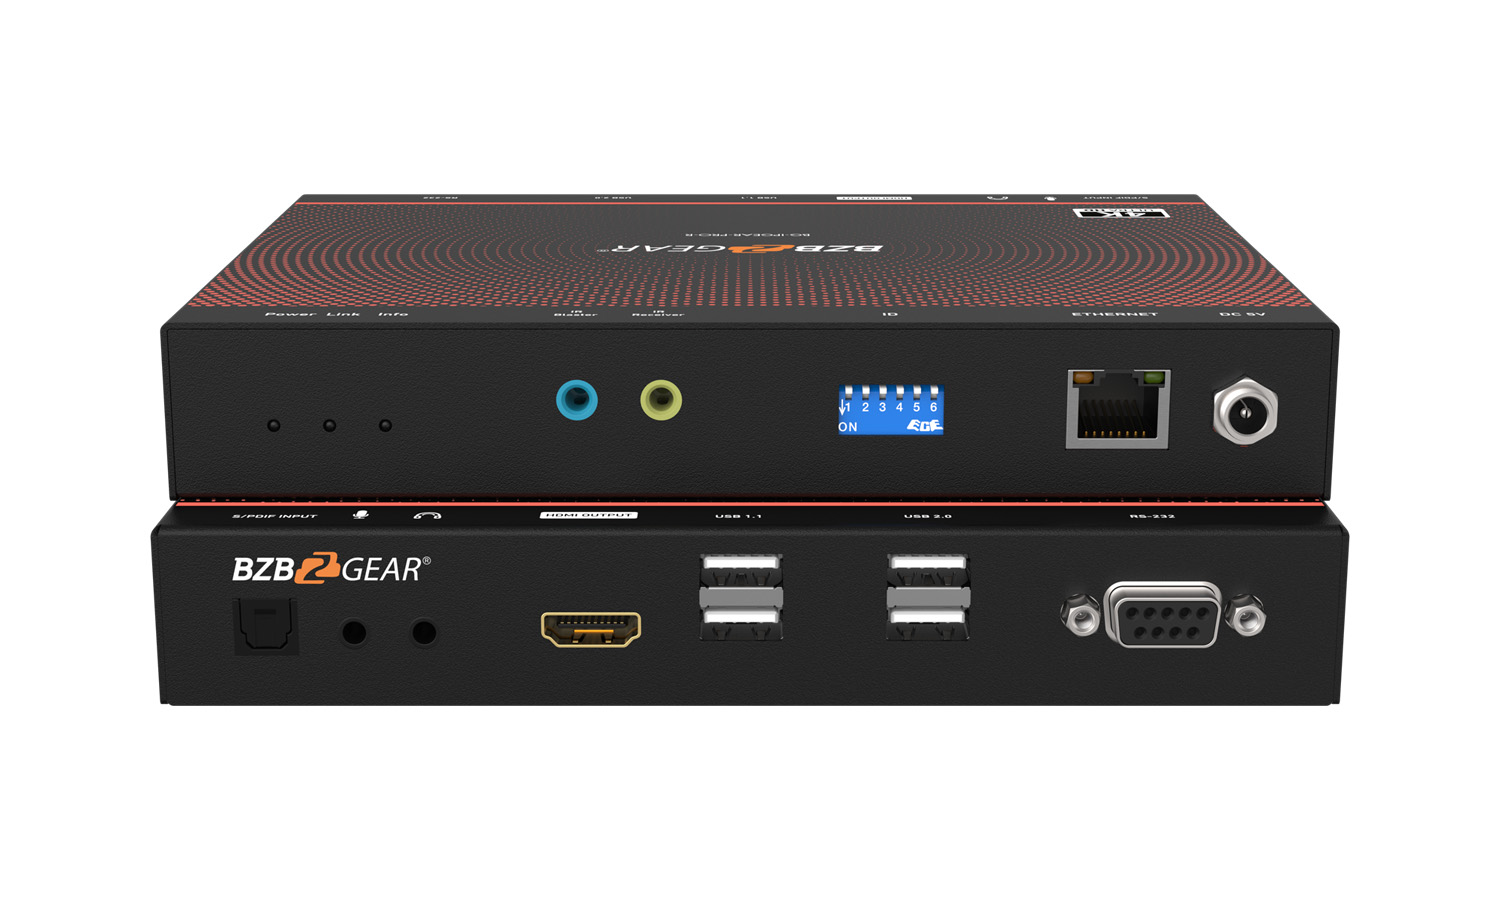 BG-IPGEAR-PRO-R 4K UHD AV over IP Multicast Receiver with Video Wall, KVM and PoE support by BZBGEAR